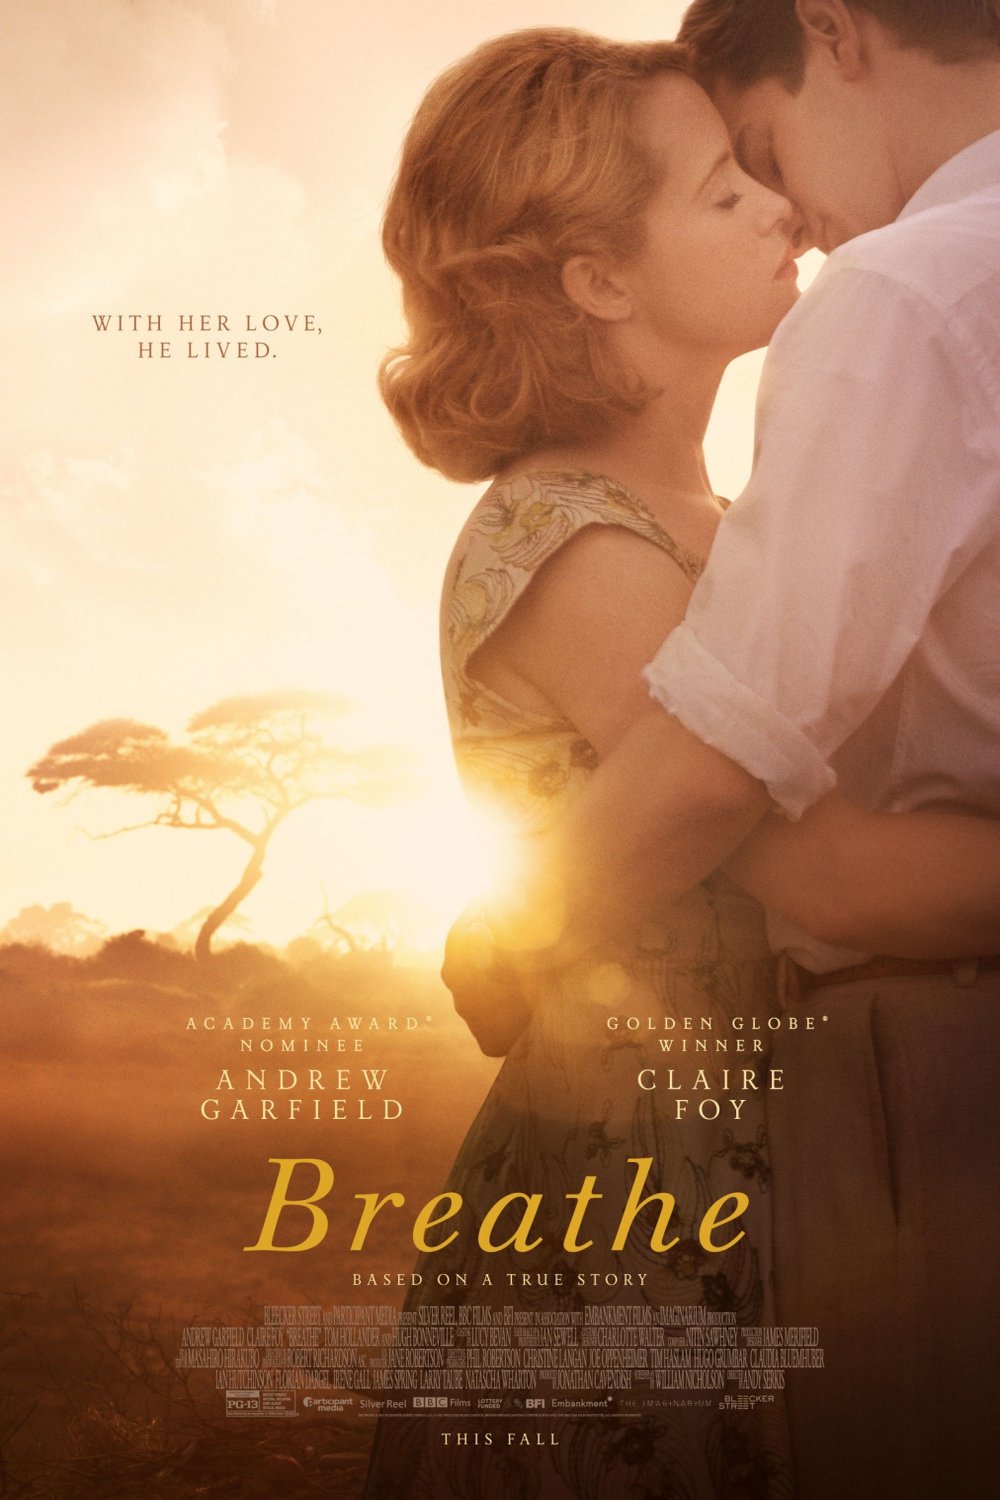 Poster of the movie Breathe